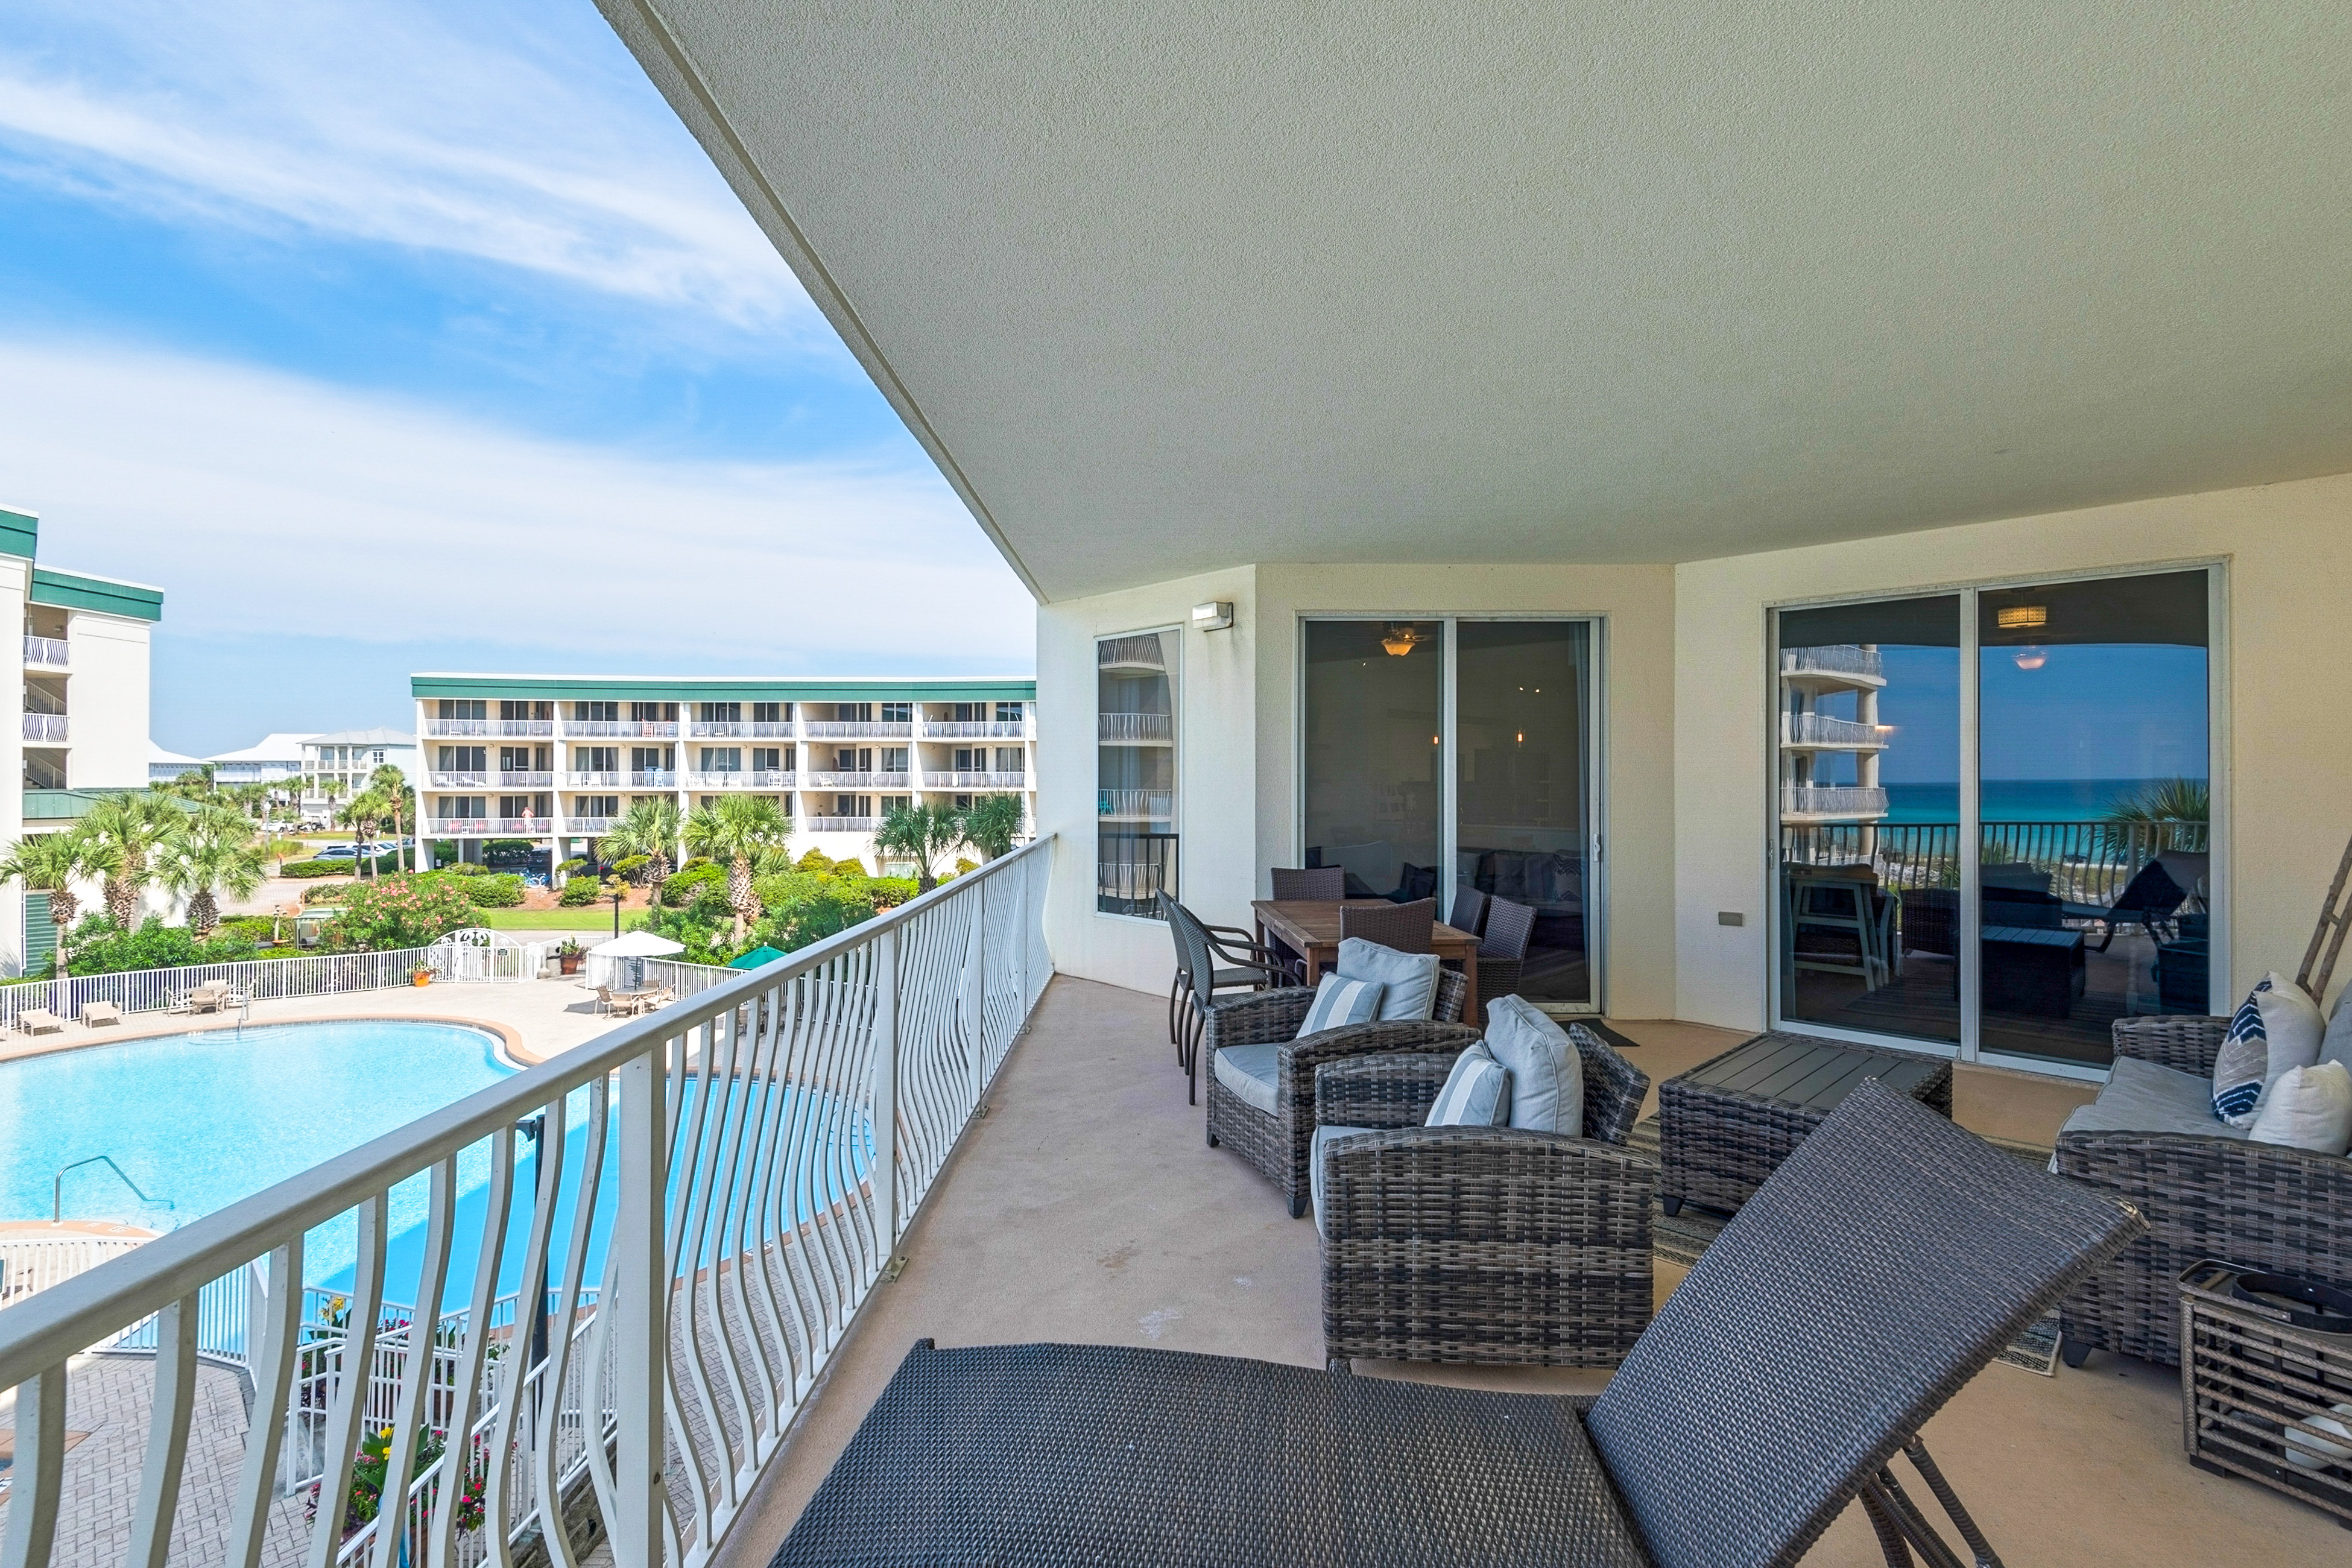 Dunes of Seagrove A206 Condo rental in Dunes of Seagrove in Highway 30-A Florida - #10